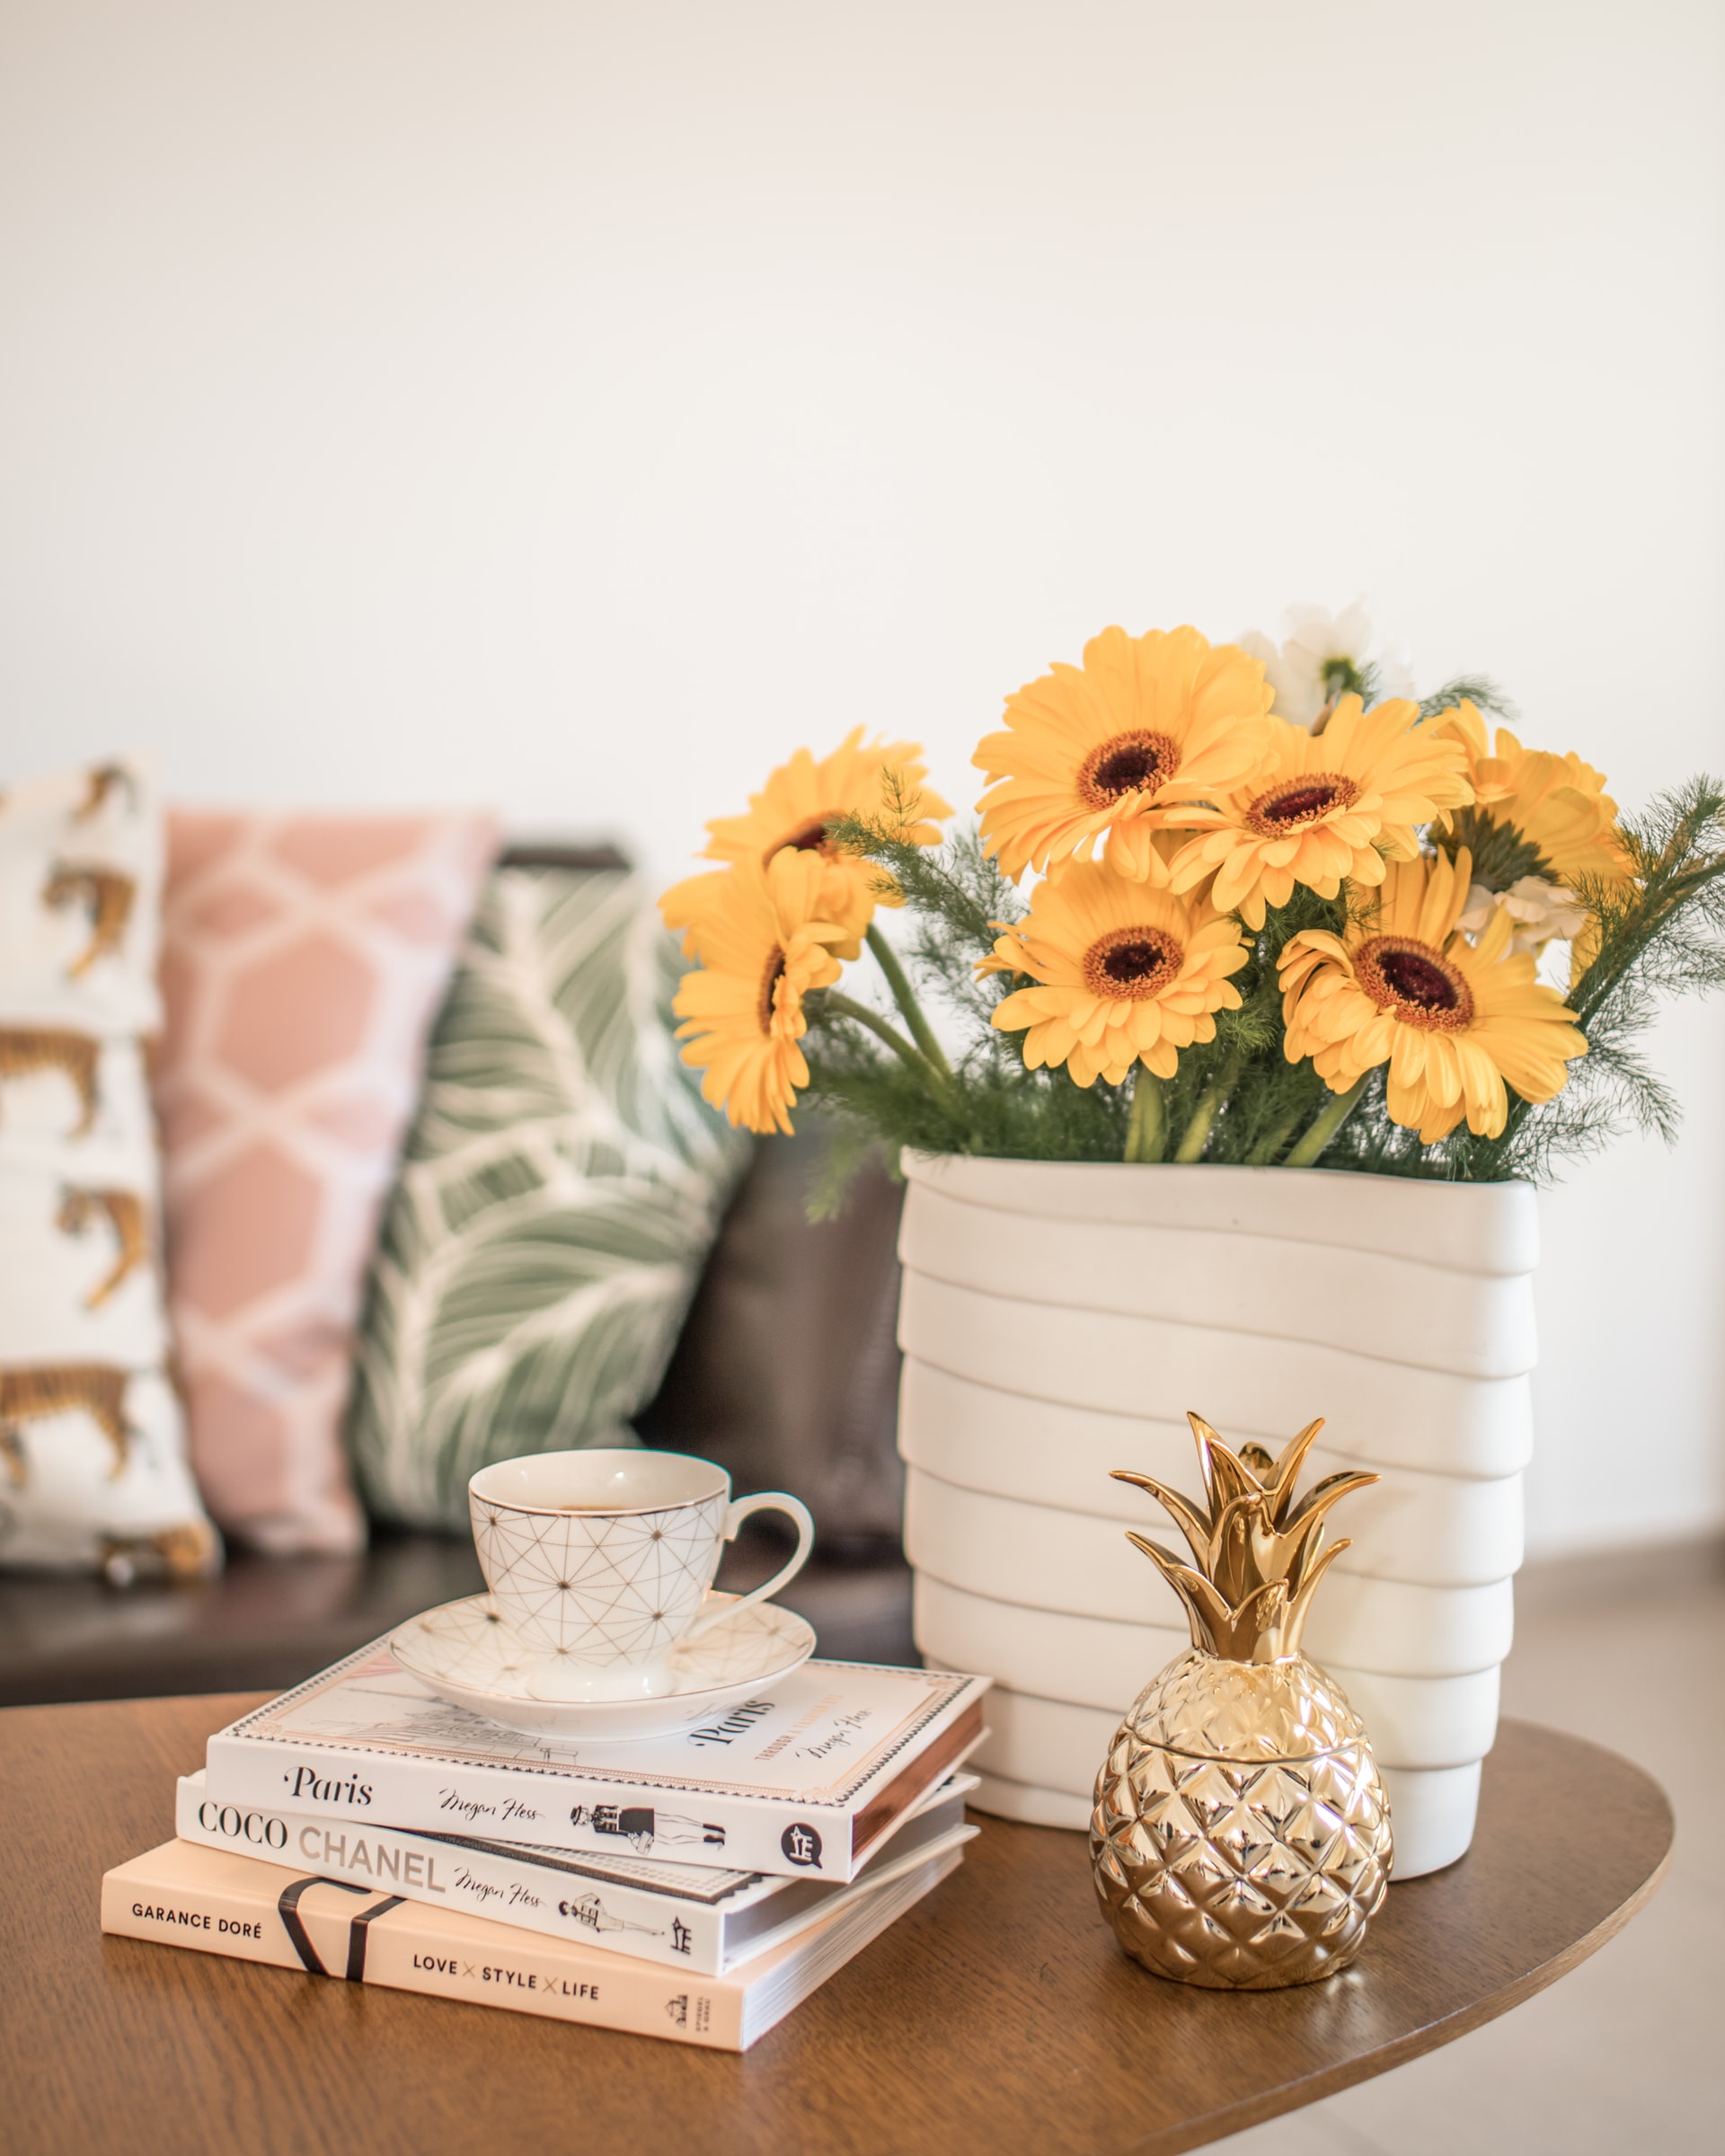 Table with Yellow Flowers in Vase Coffee Cup and Saucer on Books with Metal Pineapple